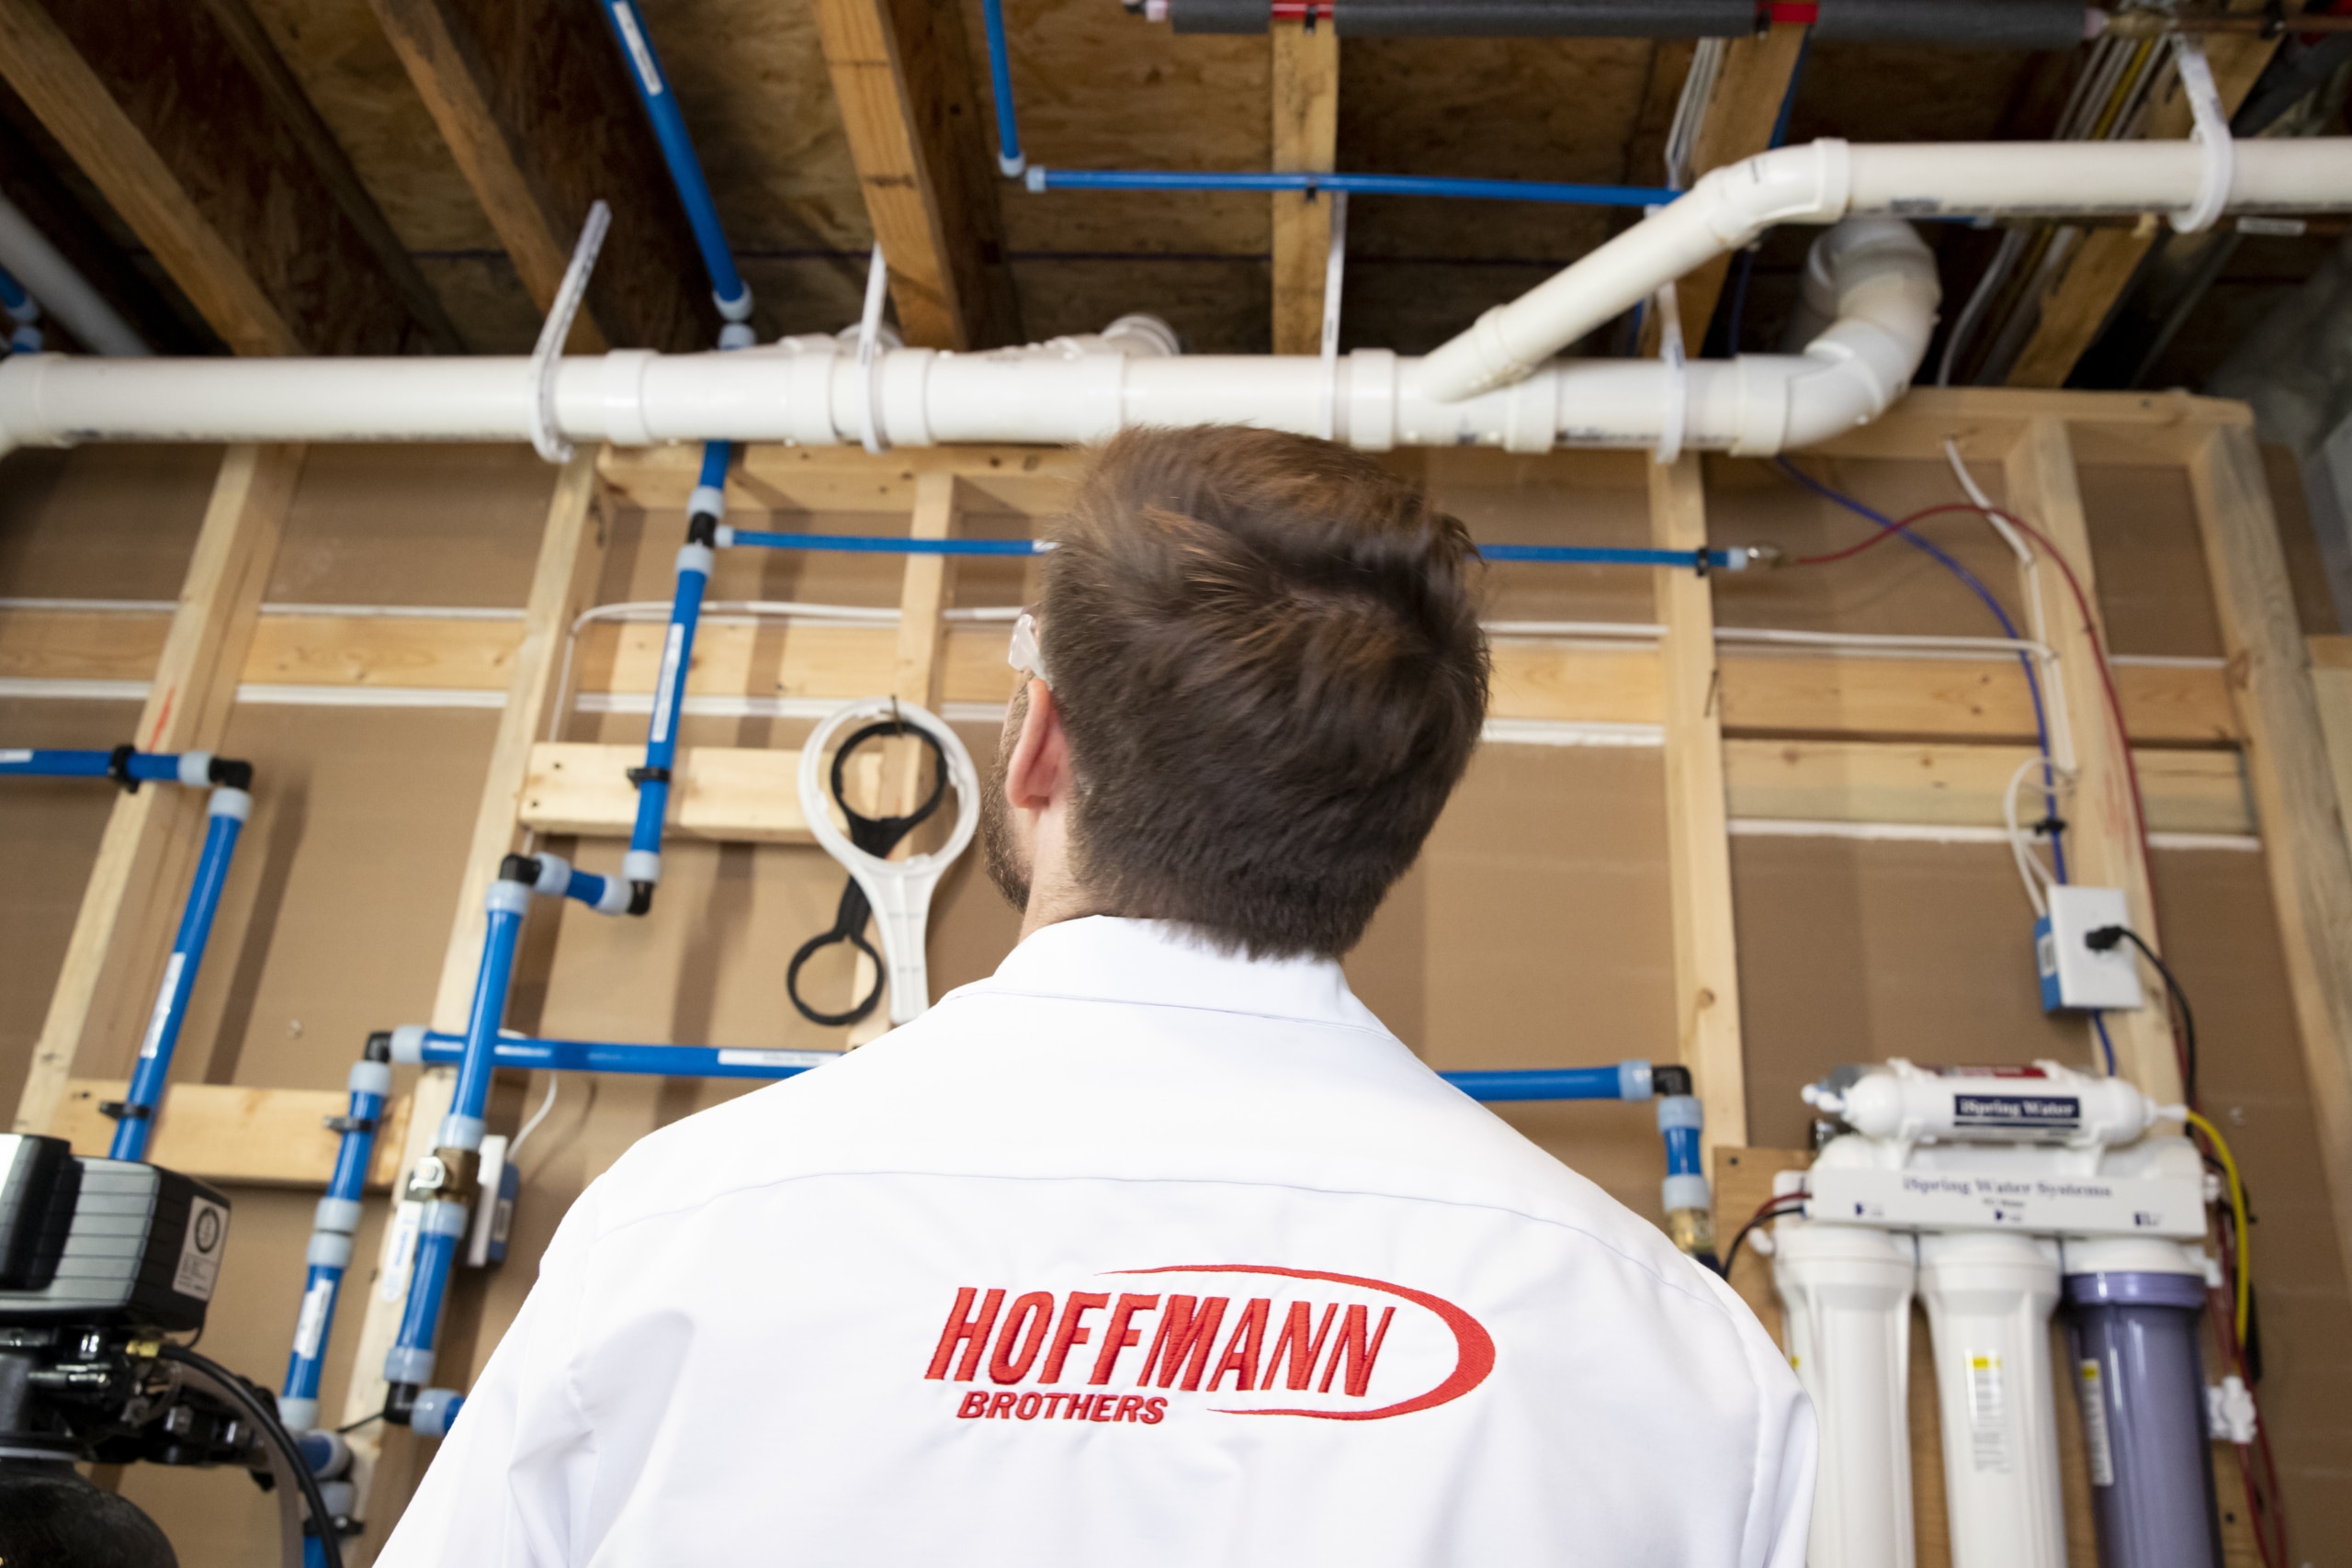 Water Treatment System Services By Hoffmann Brothers In Nashville, Tn